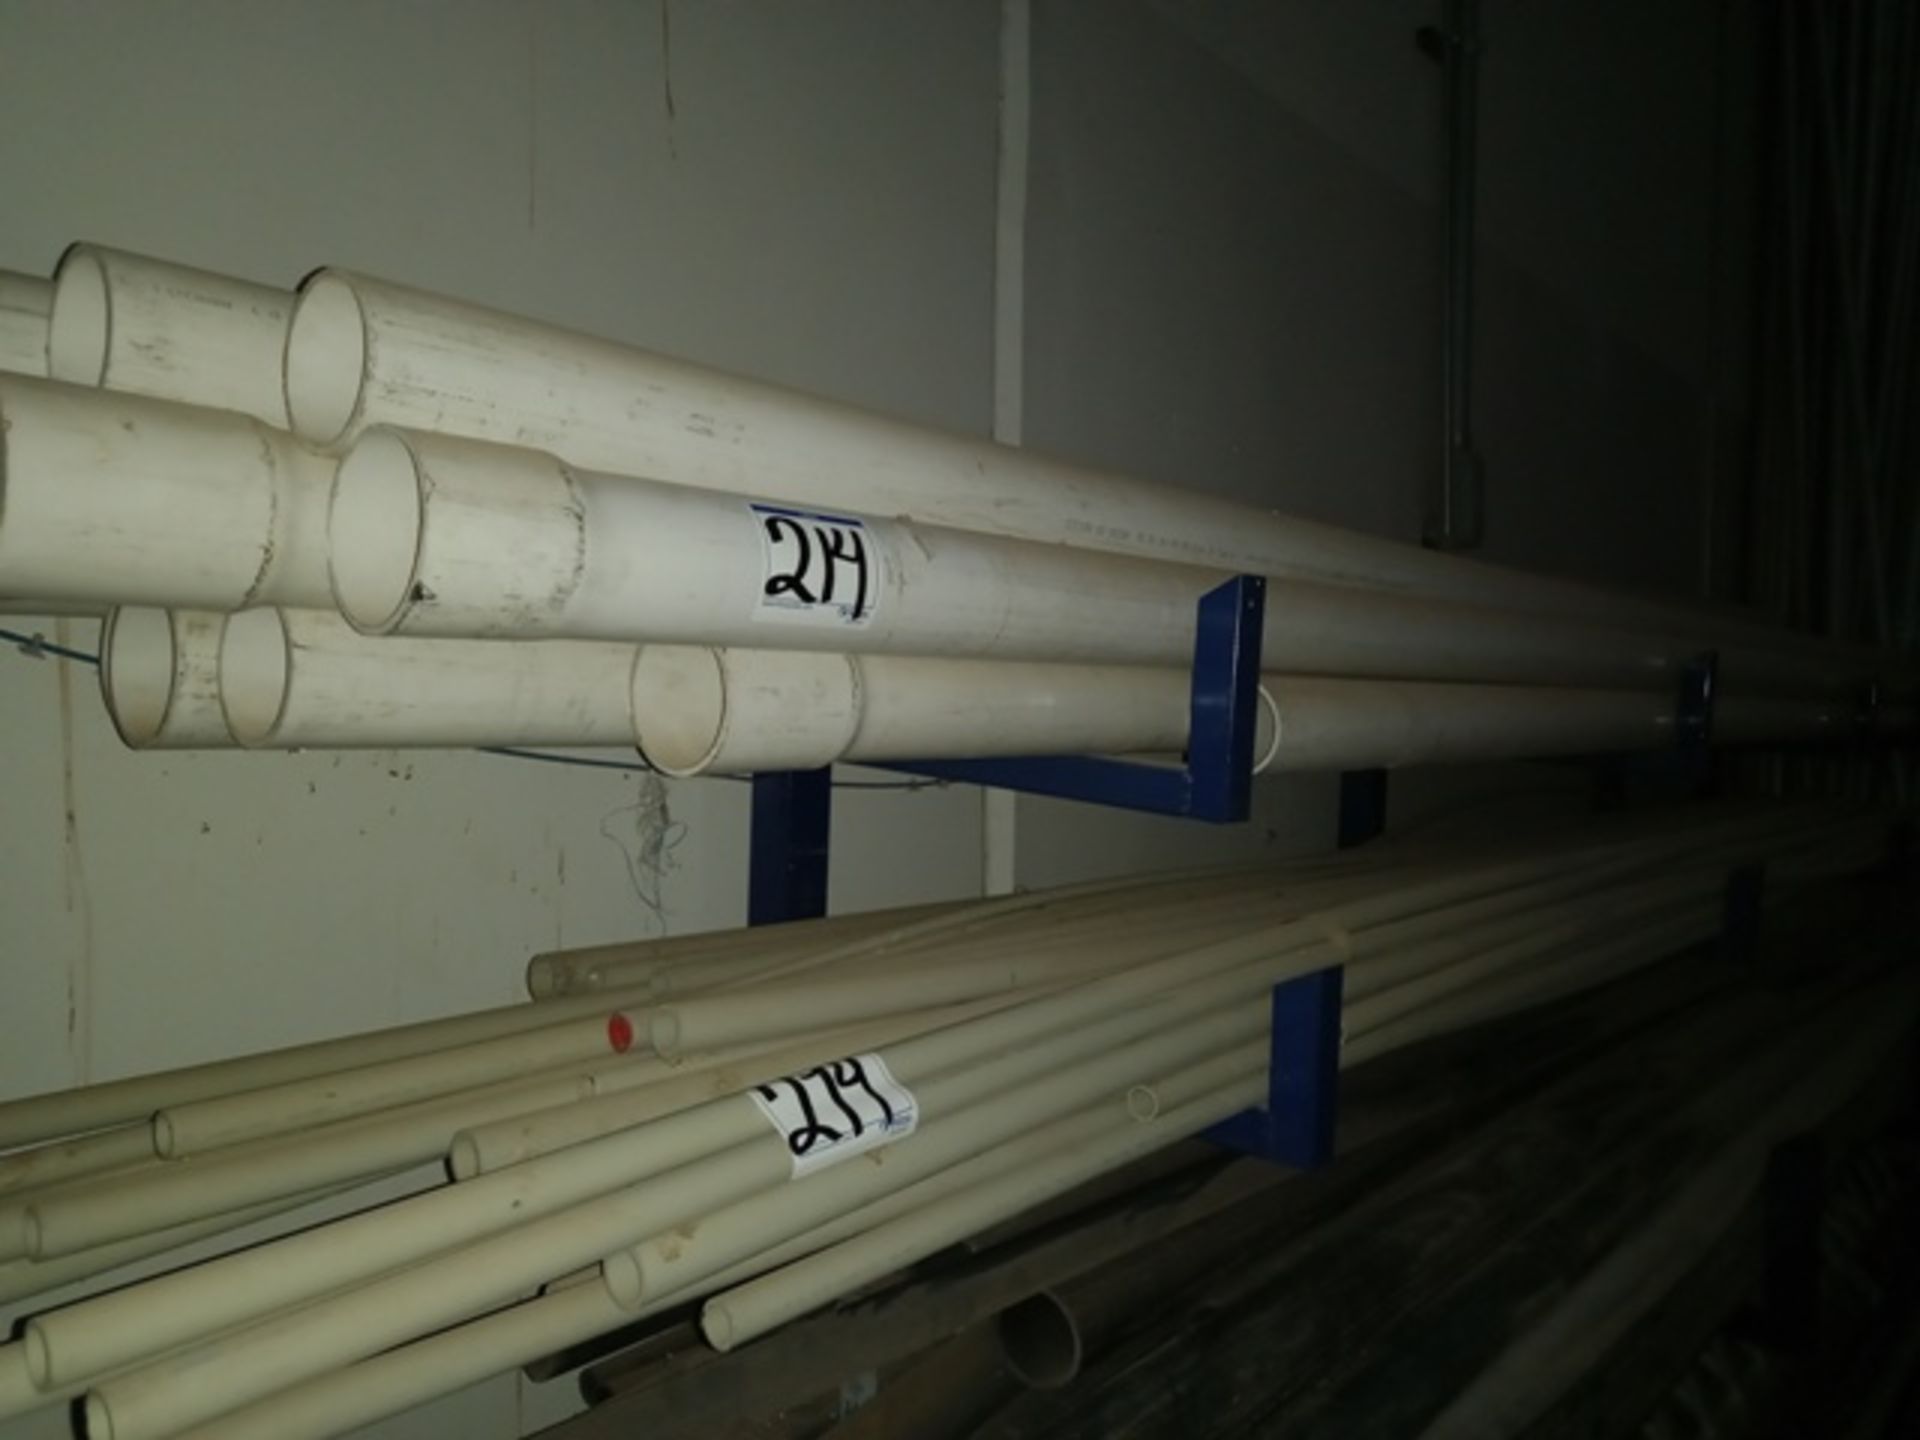 Lot of (1) Metallic Rack with Hydraulic PVC Pipe, Different Sizes (1" - 4") - Image 2 of 7